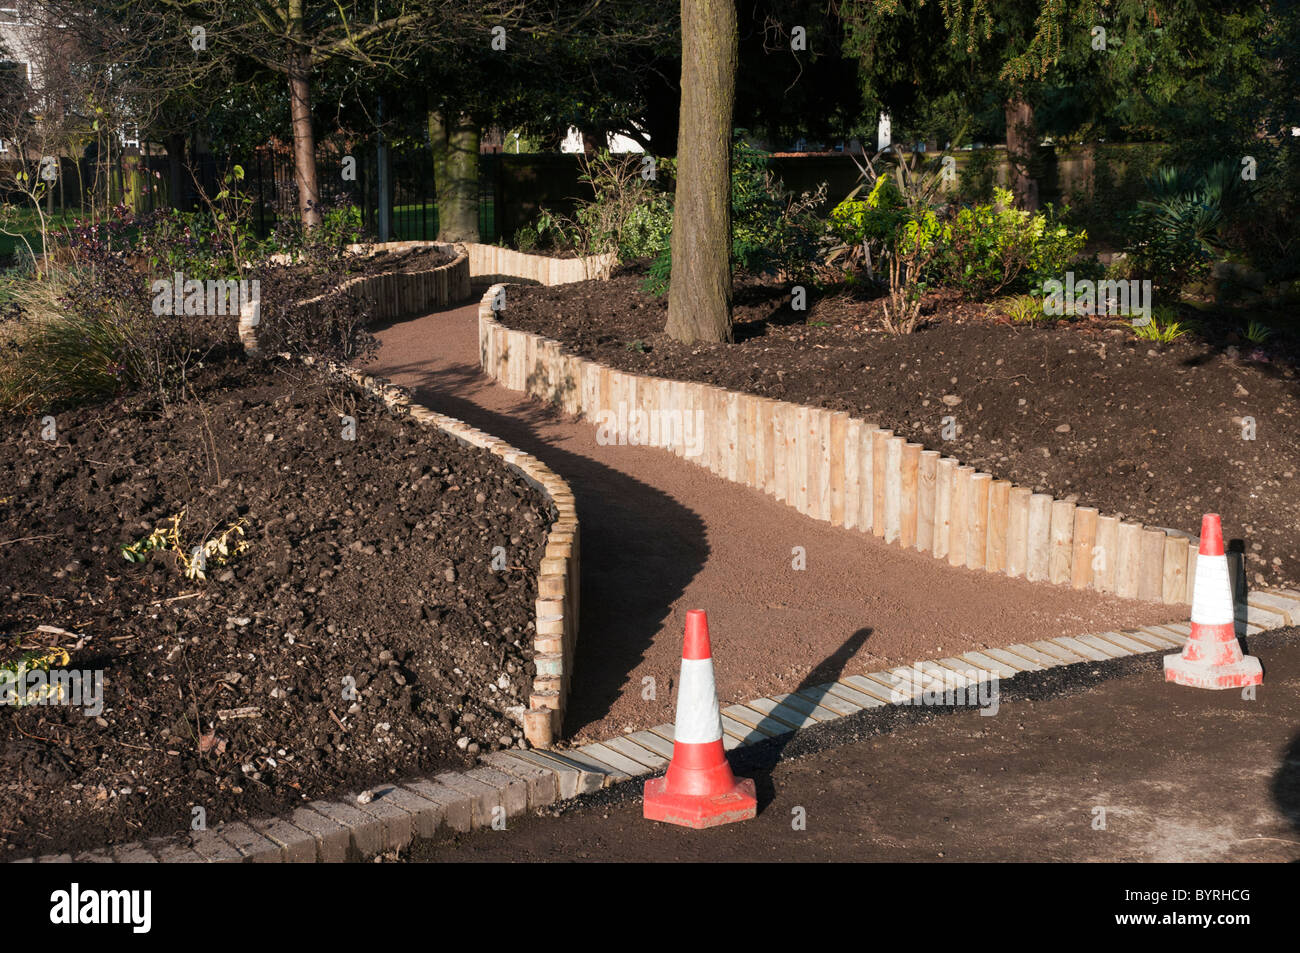 A new, edged, curving path made through an existing raised bed flowerbed in a public park. Stock Photo